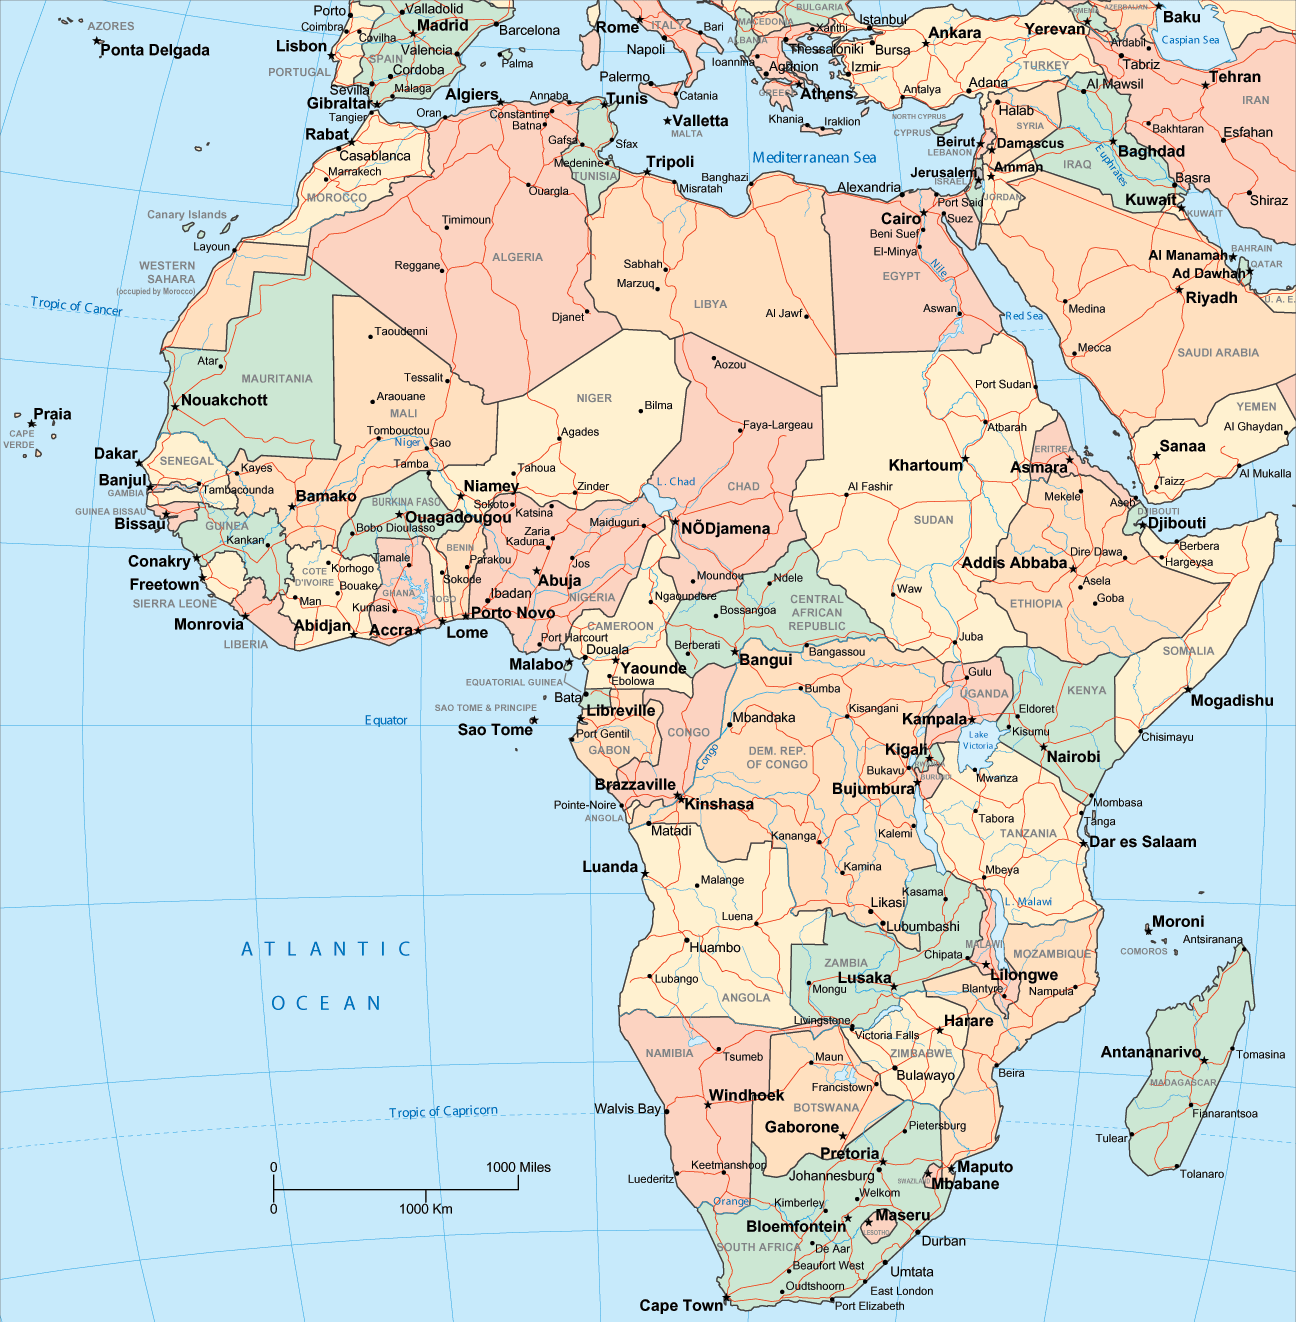 Map of Africa with African Countries